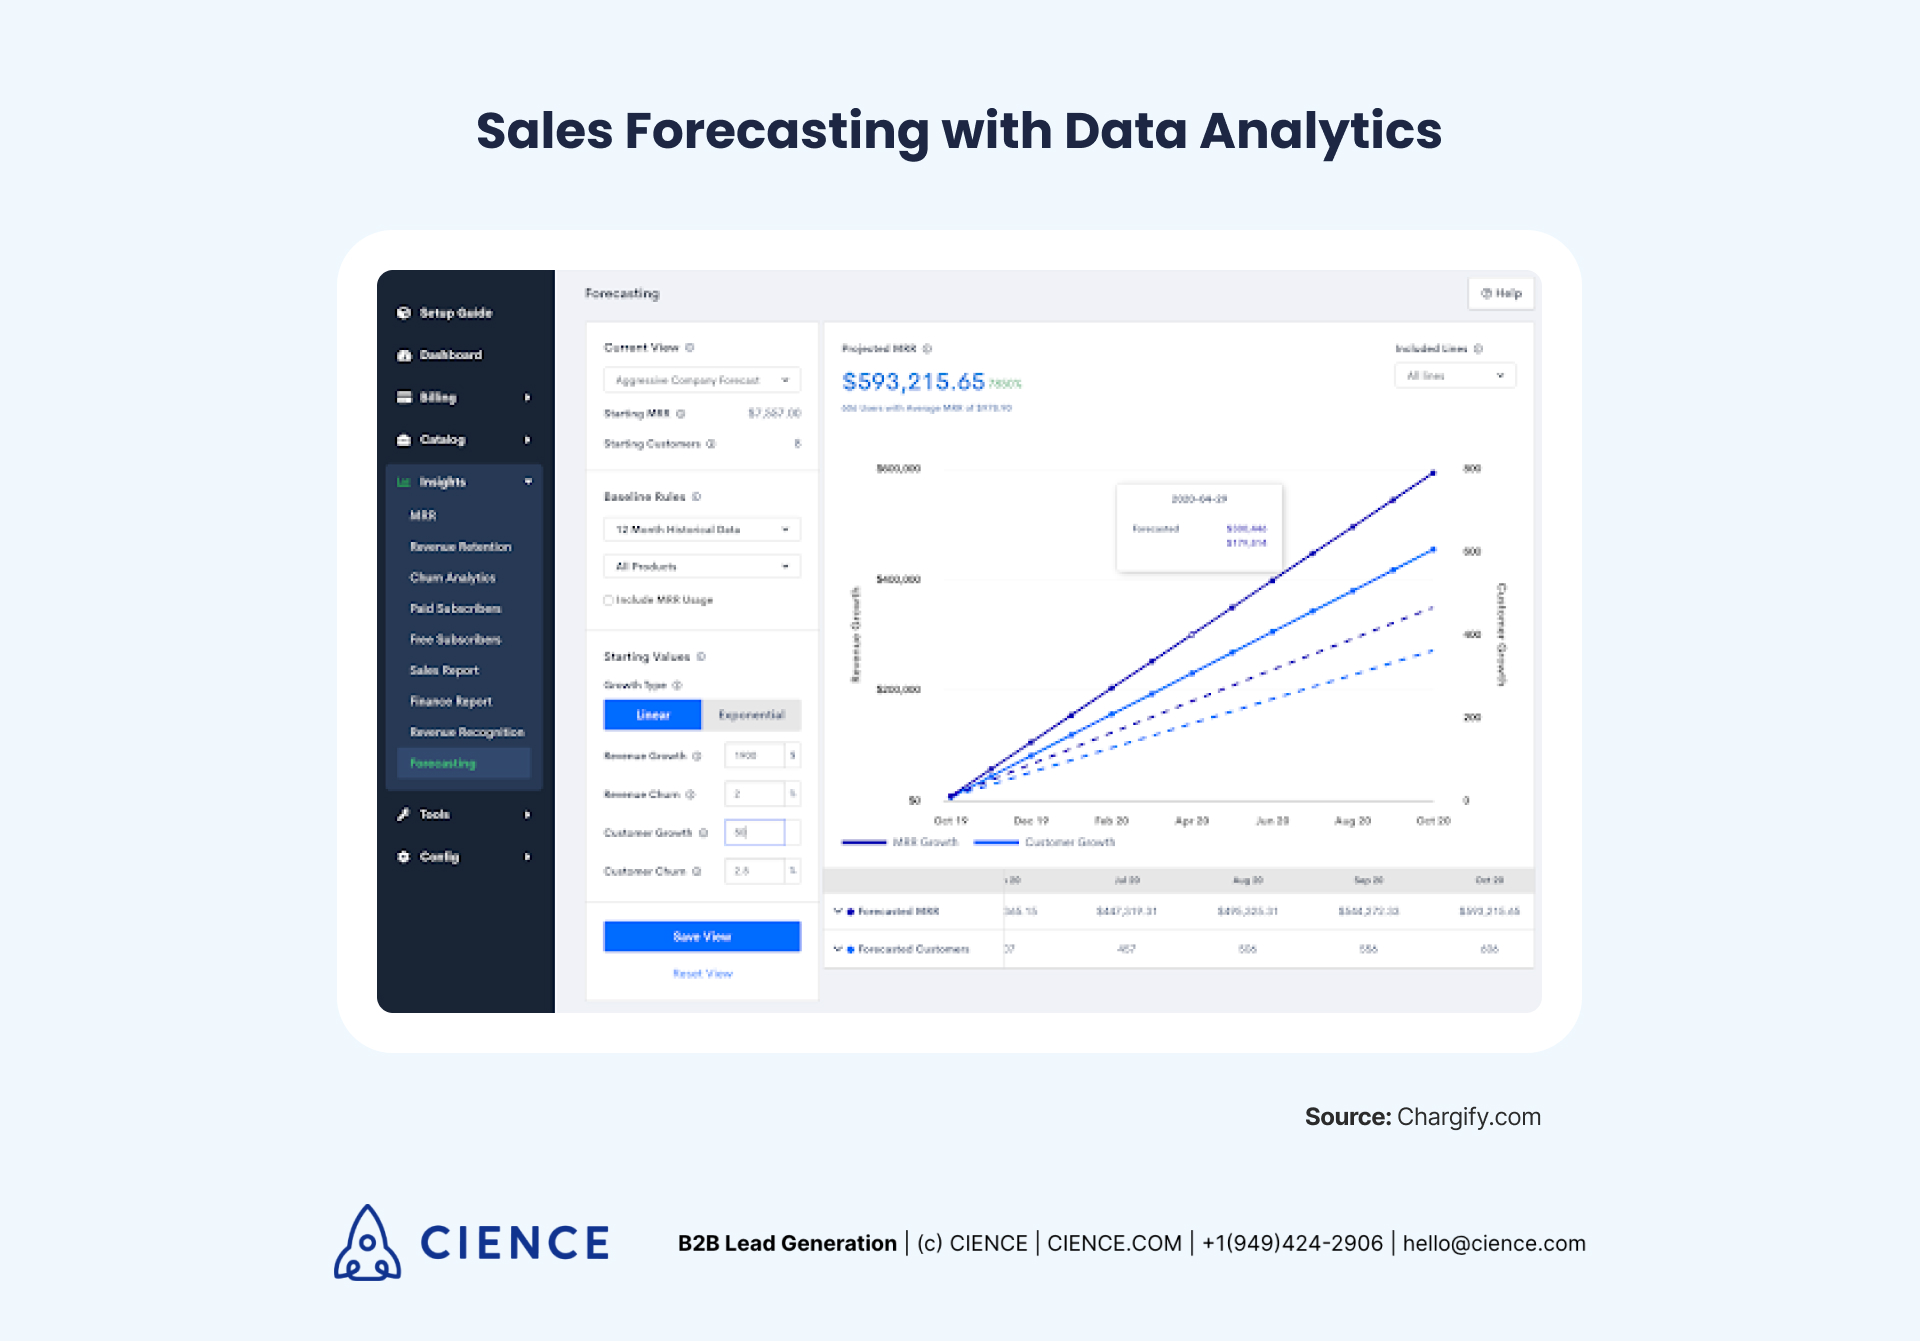 Sales forecasting with data analytics - an example of revenue forecasting  by Chargify